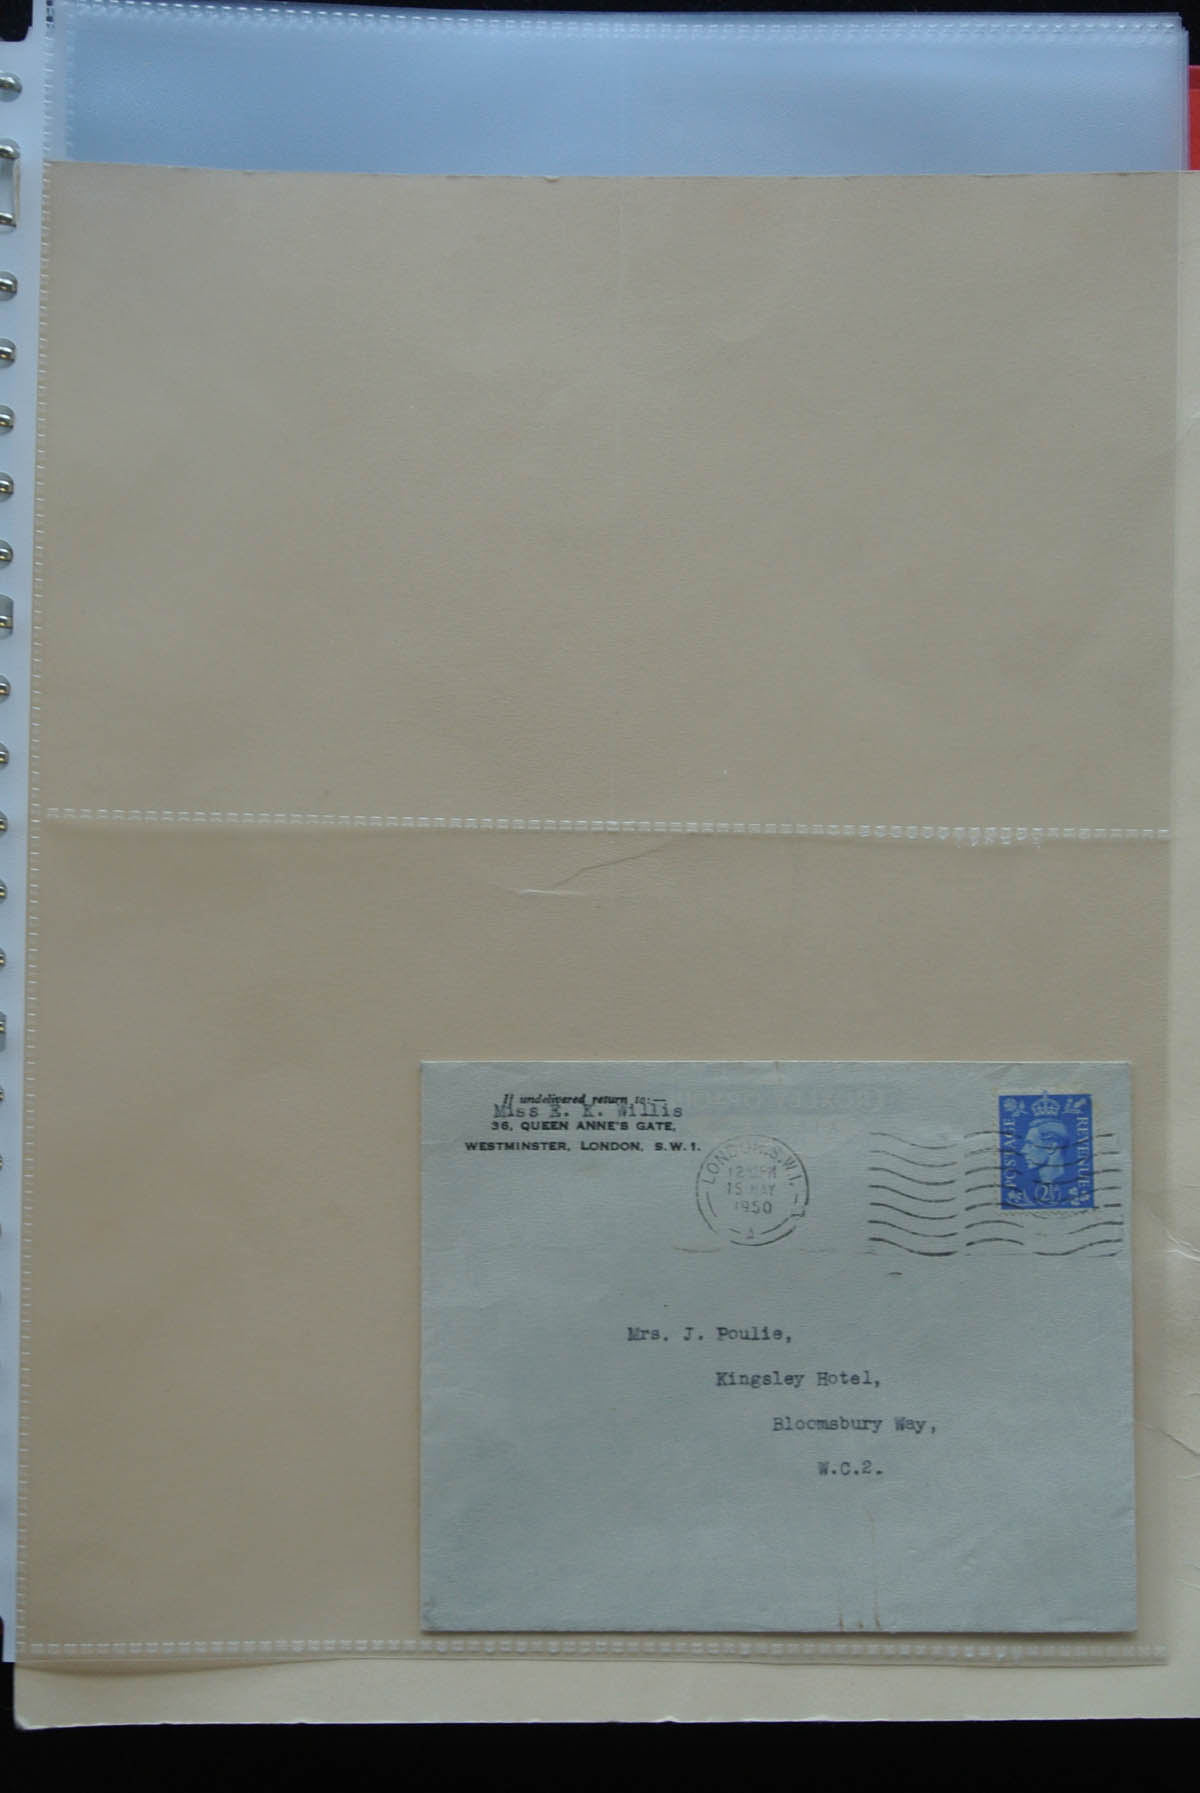 25884 042 - 25884 Europa covers '50s.